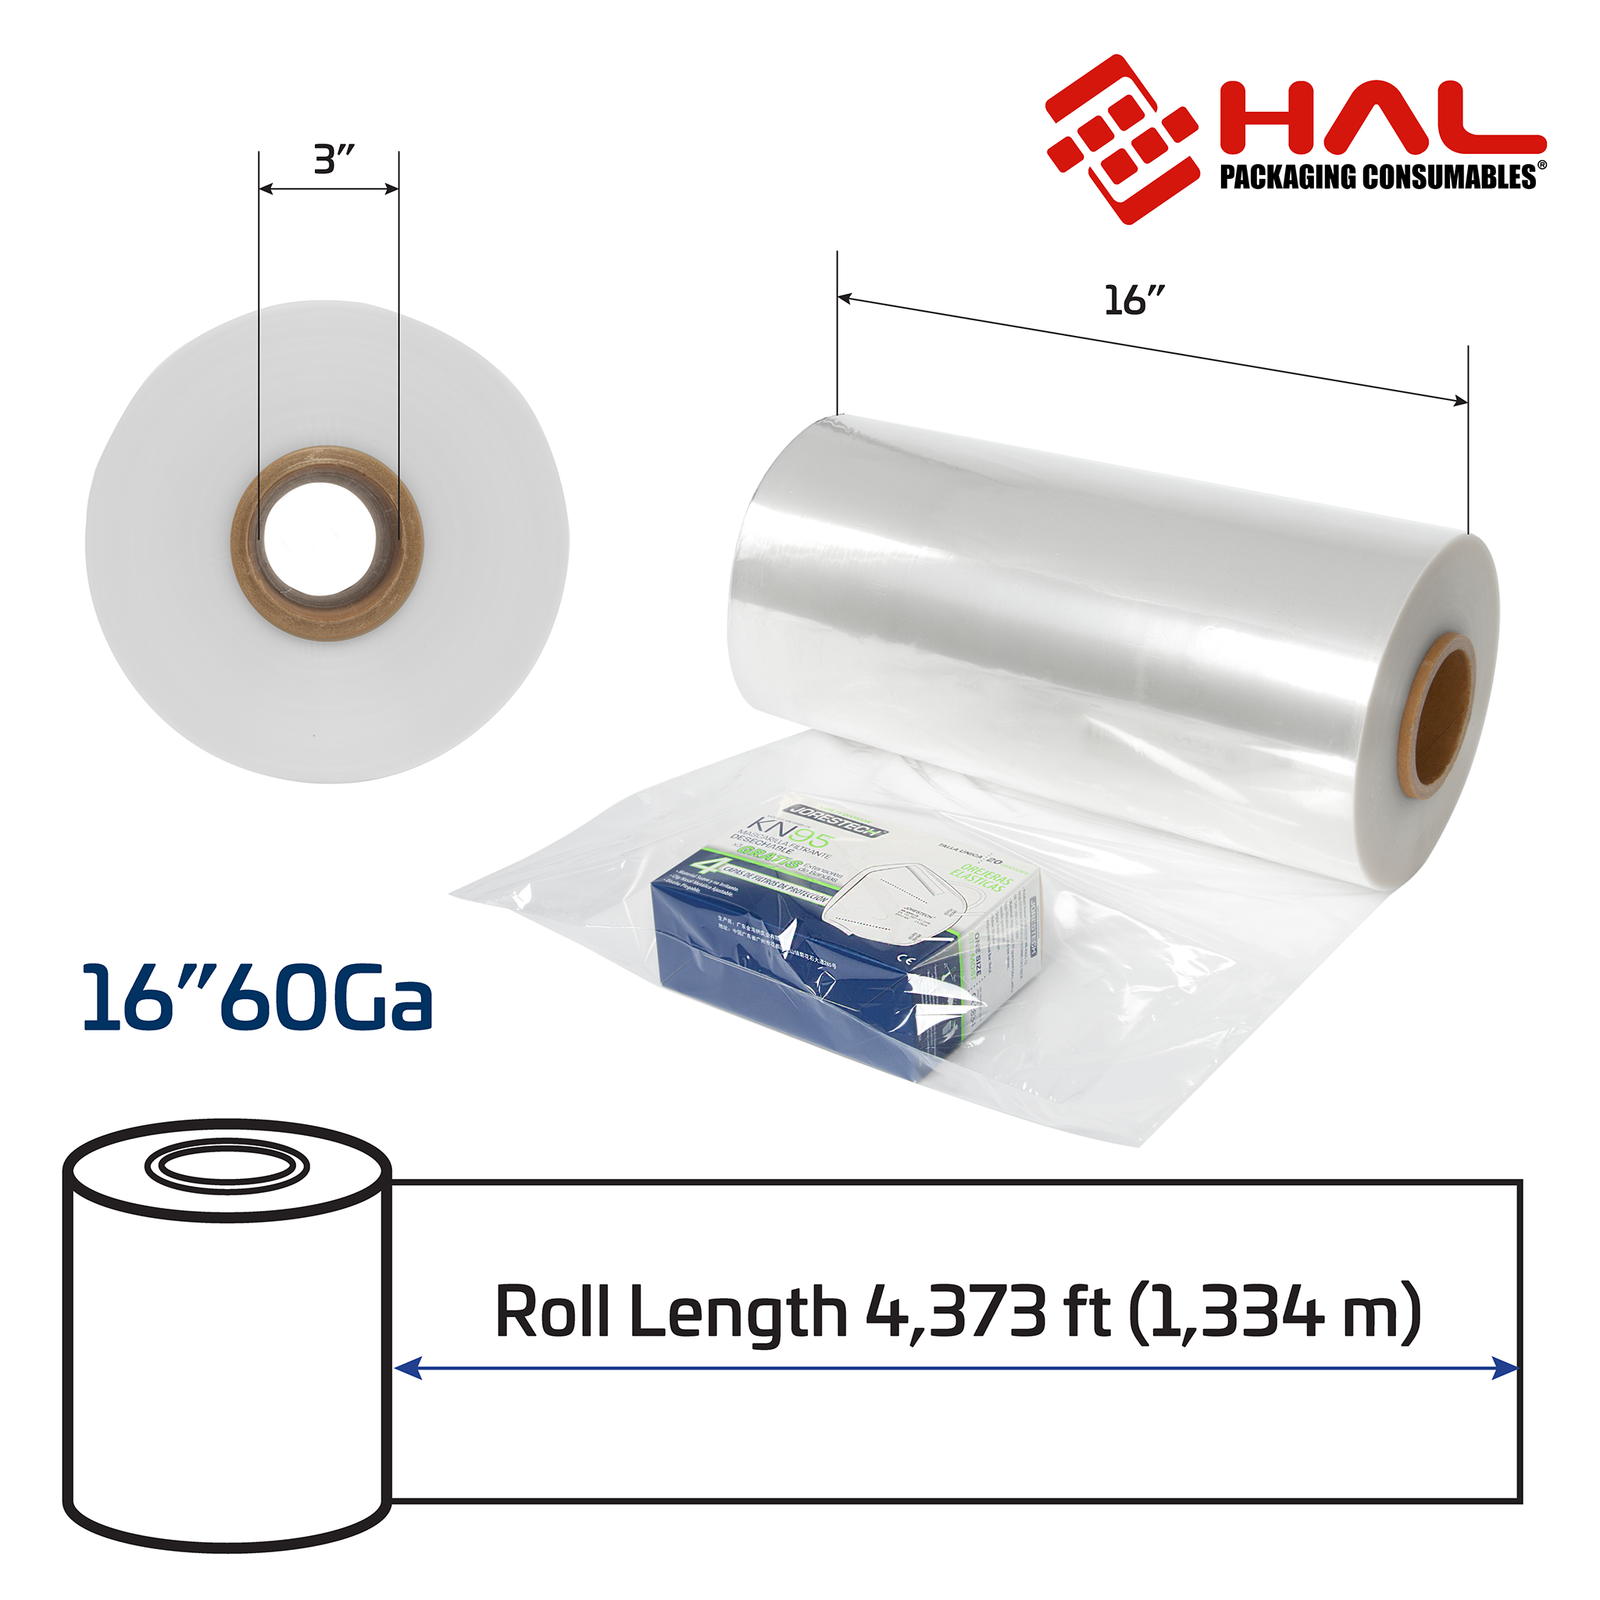 Measurements of the 60 gauge shrink wrapping film tube. 3 inch diameter of the inner core, and 16 inch width with a 4,373 ft. length.